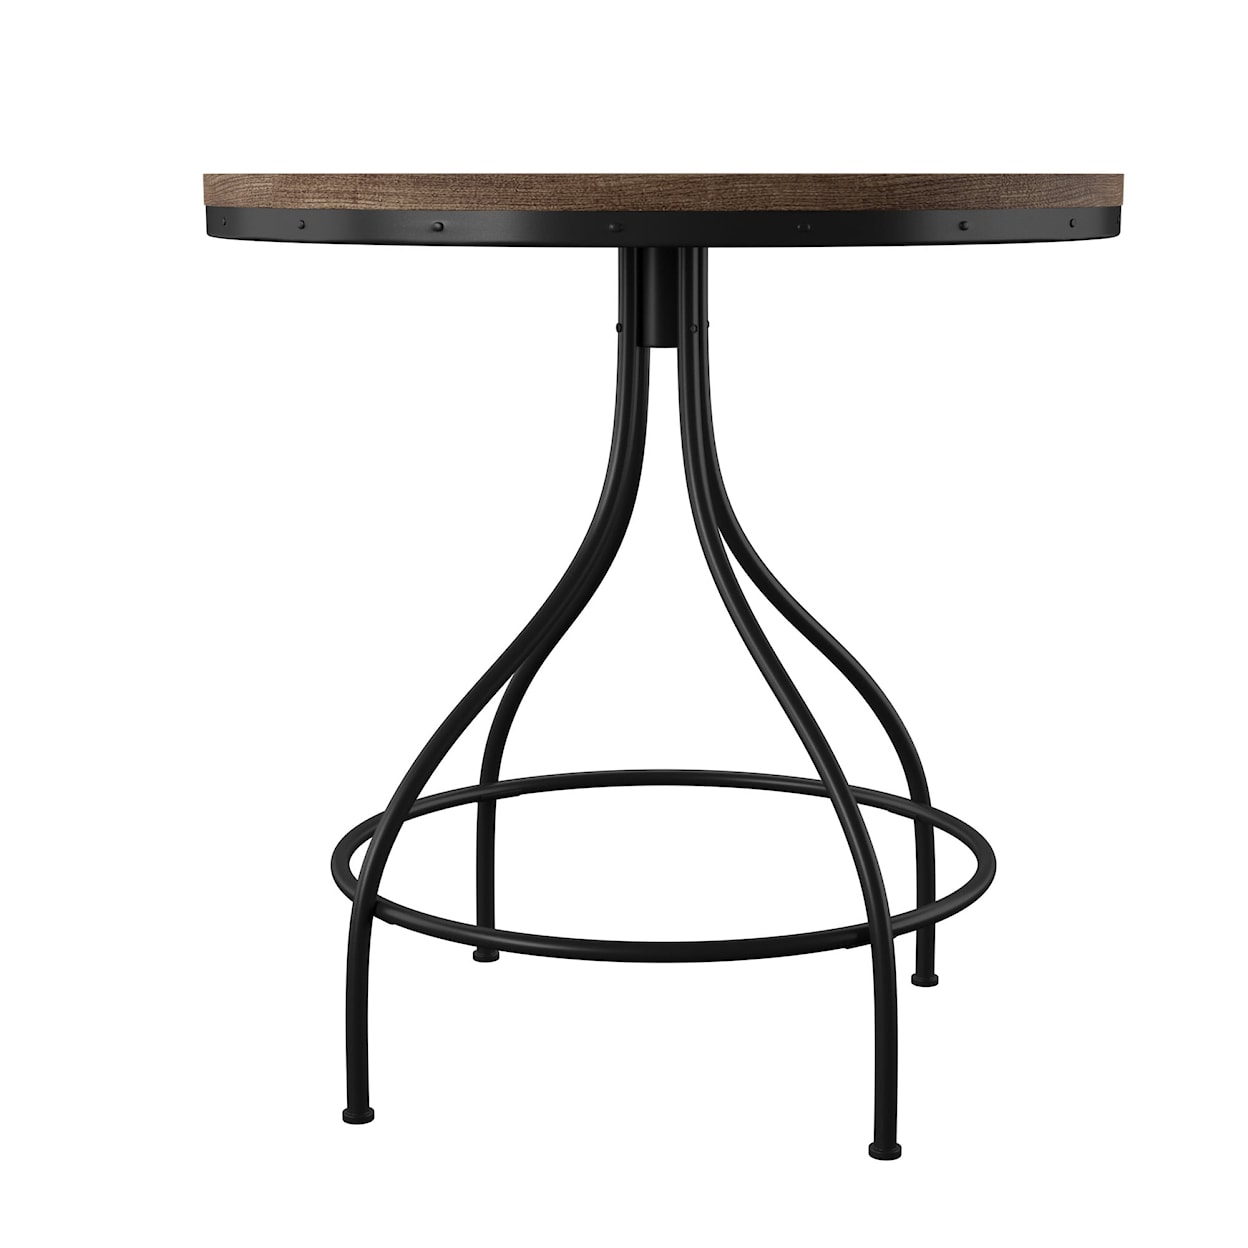 Liberty Furniture Vintage Series Counter-Height Pub Table